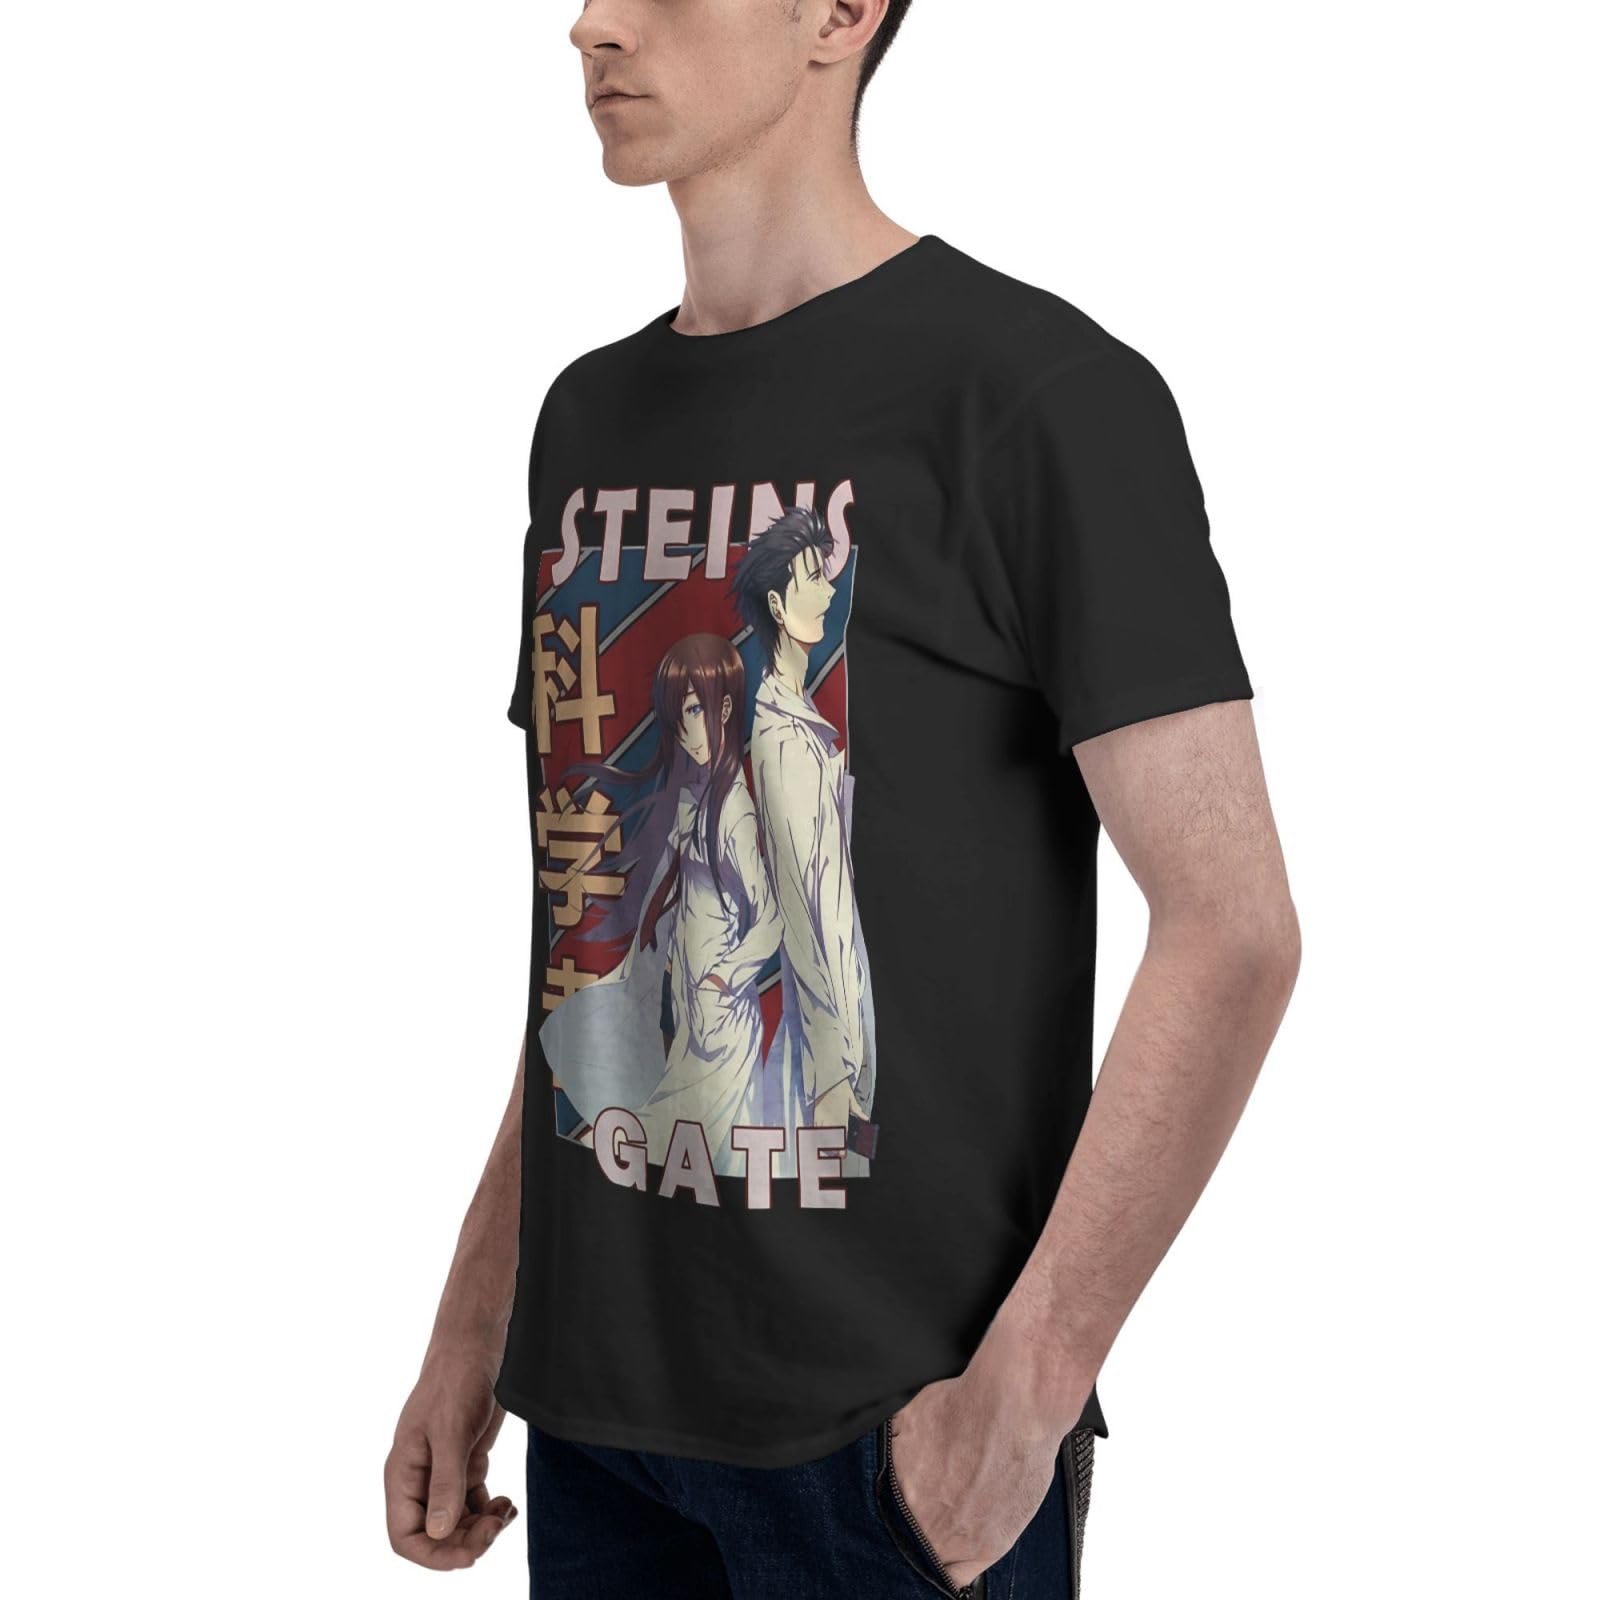 Anime Steins Gate T Shirt Man's Summer Round Neck Tops Casual Short Sleeves Tee Black